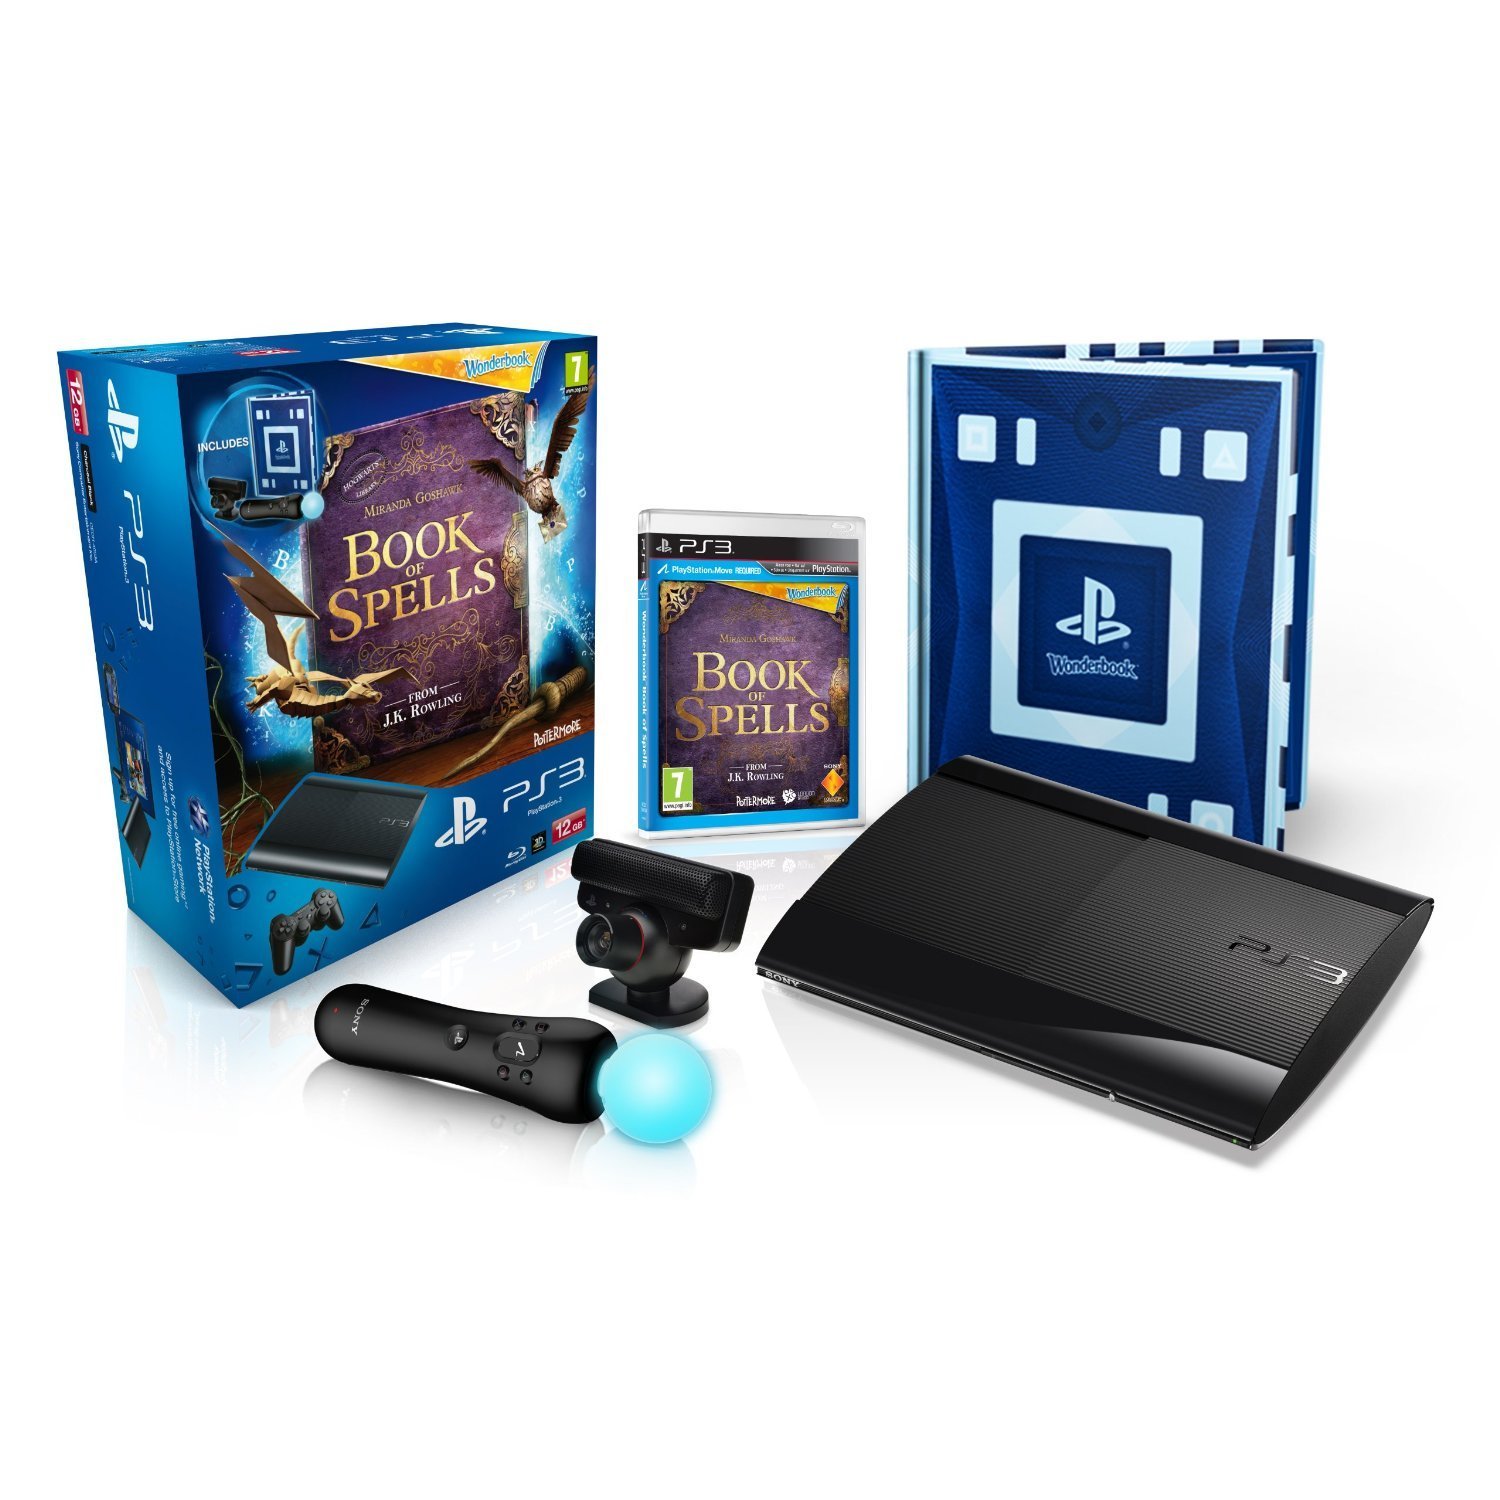 Sony PlayStation 3 12GB Super Slim with Book Of Spells - Wonderbook, Move Controller and Eye Cam.